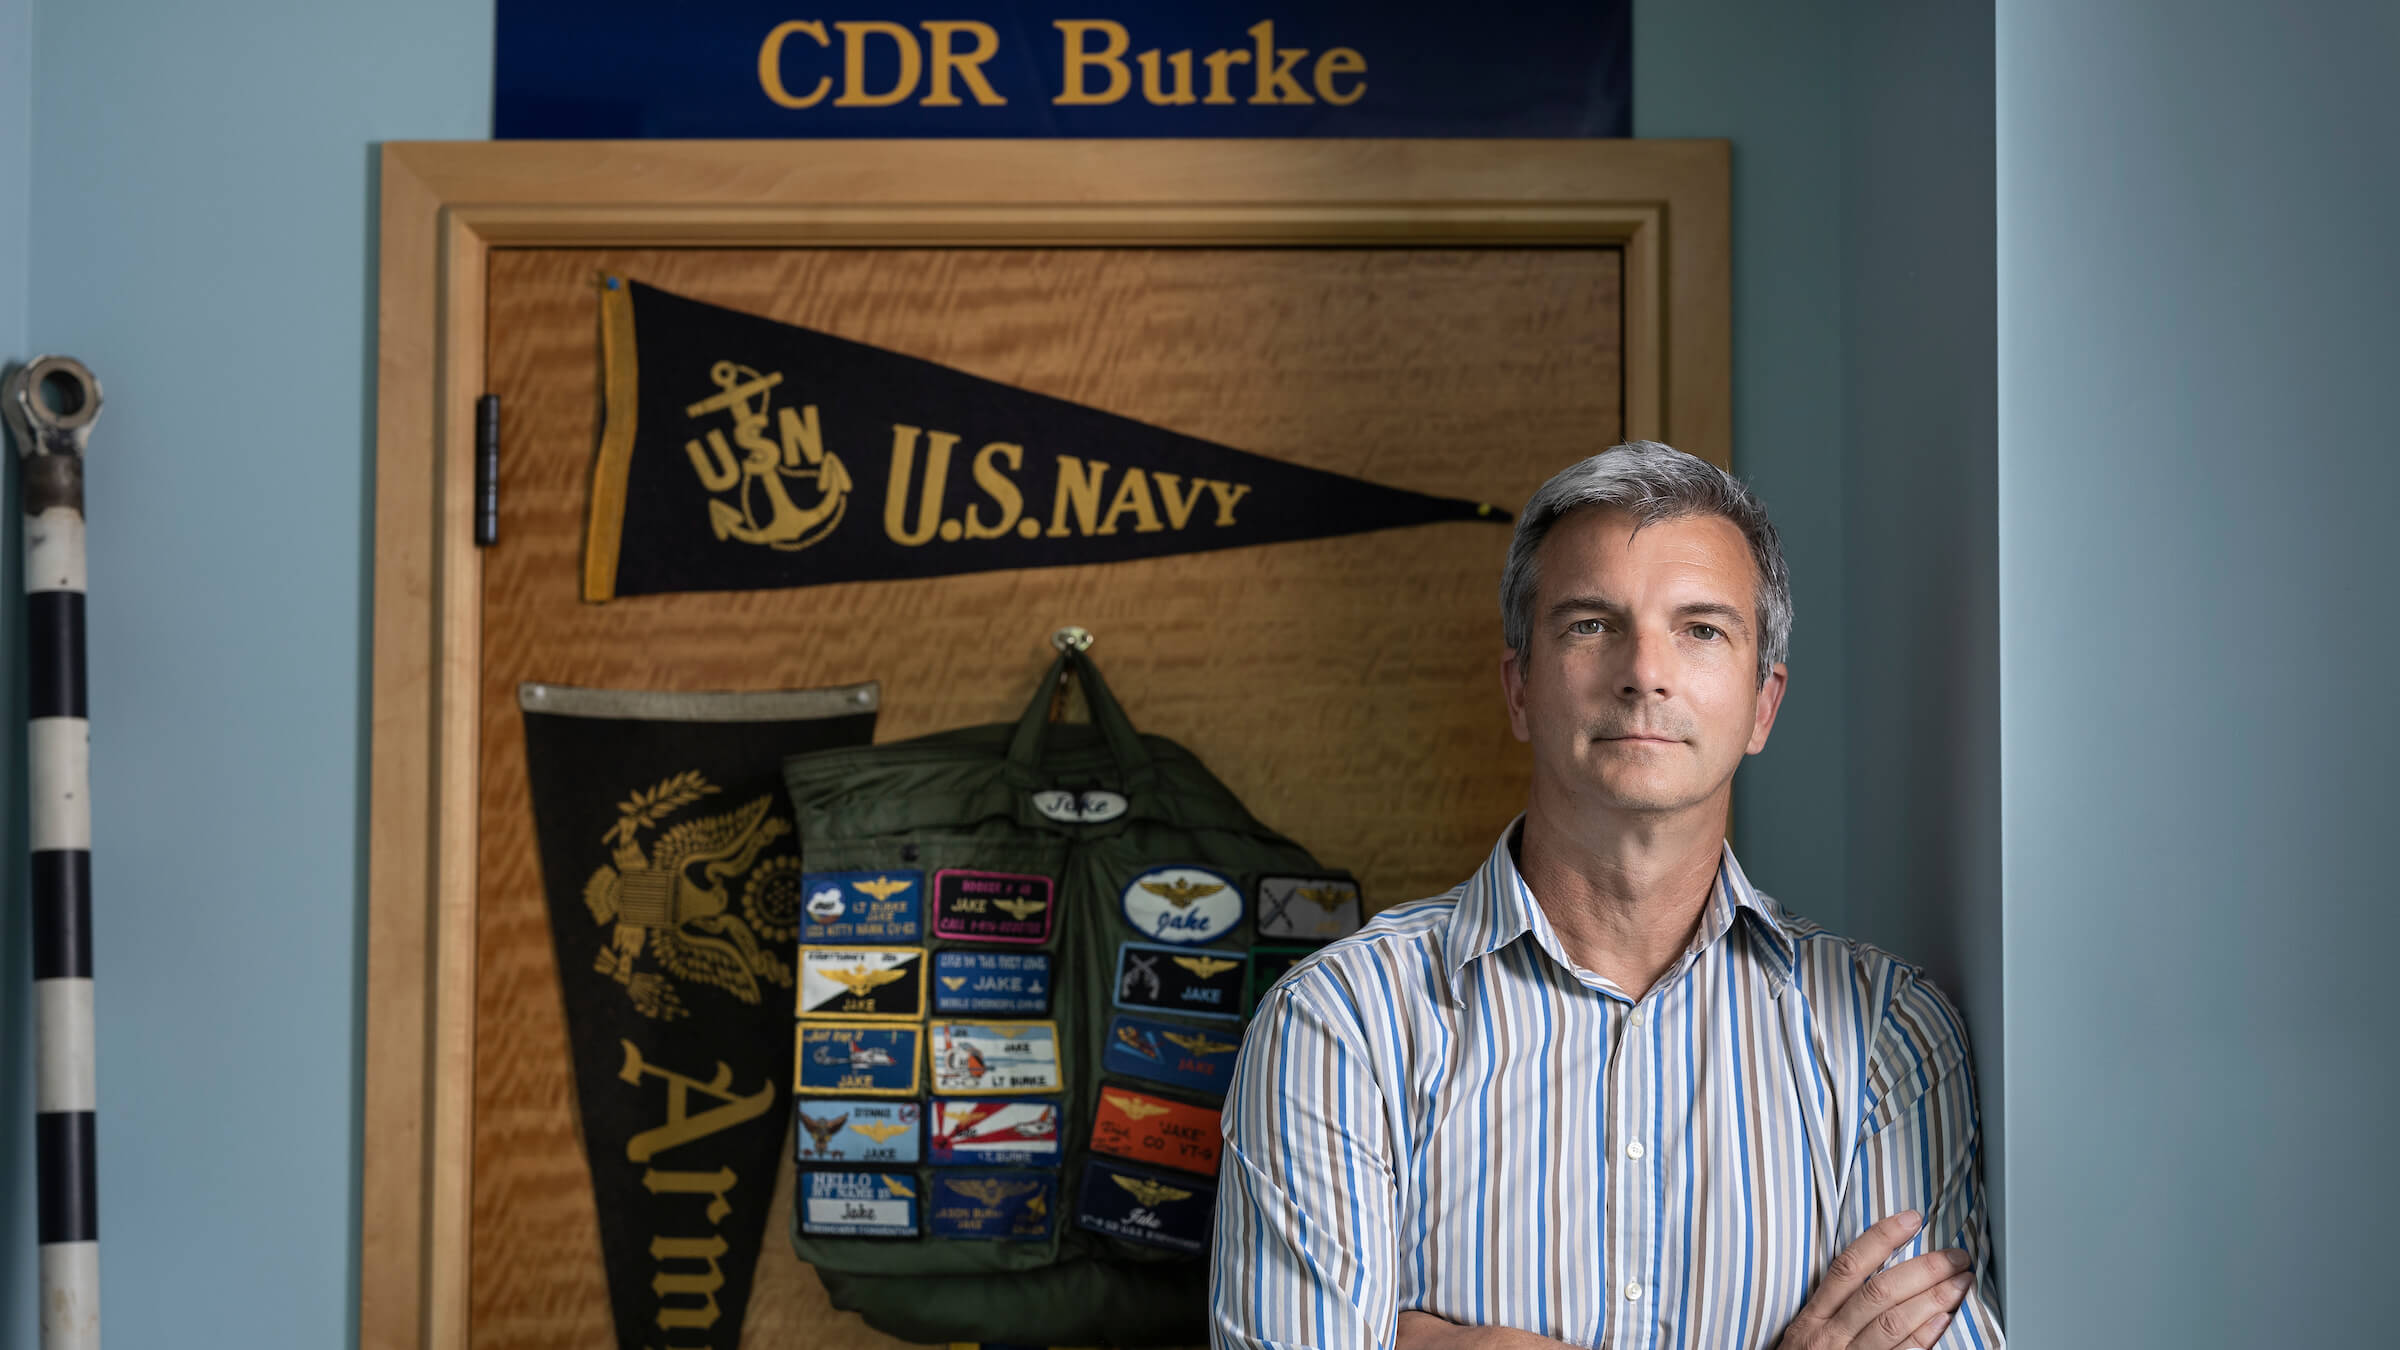 Jason Burke in his home standing in front of US Navy flag and backpack with patches